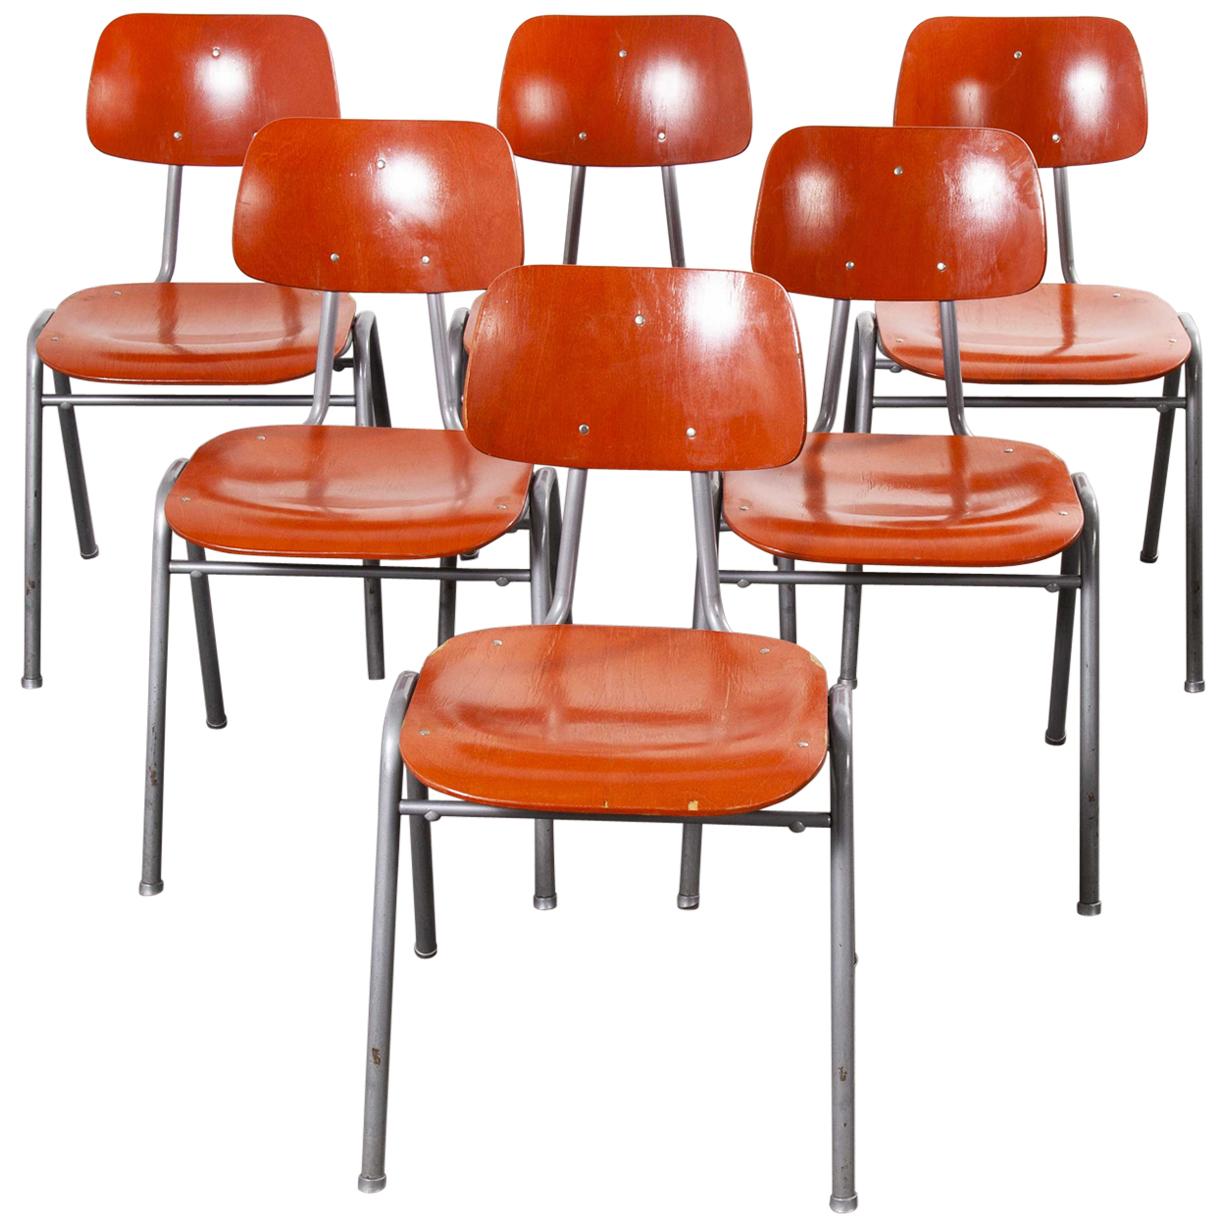 1960s Red Stacking School, University Dining Chair, Set of Six